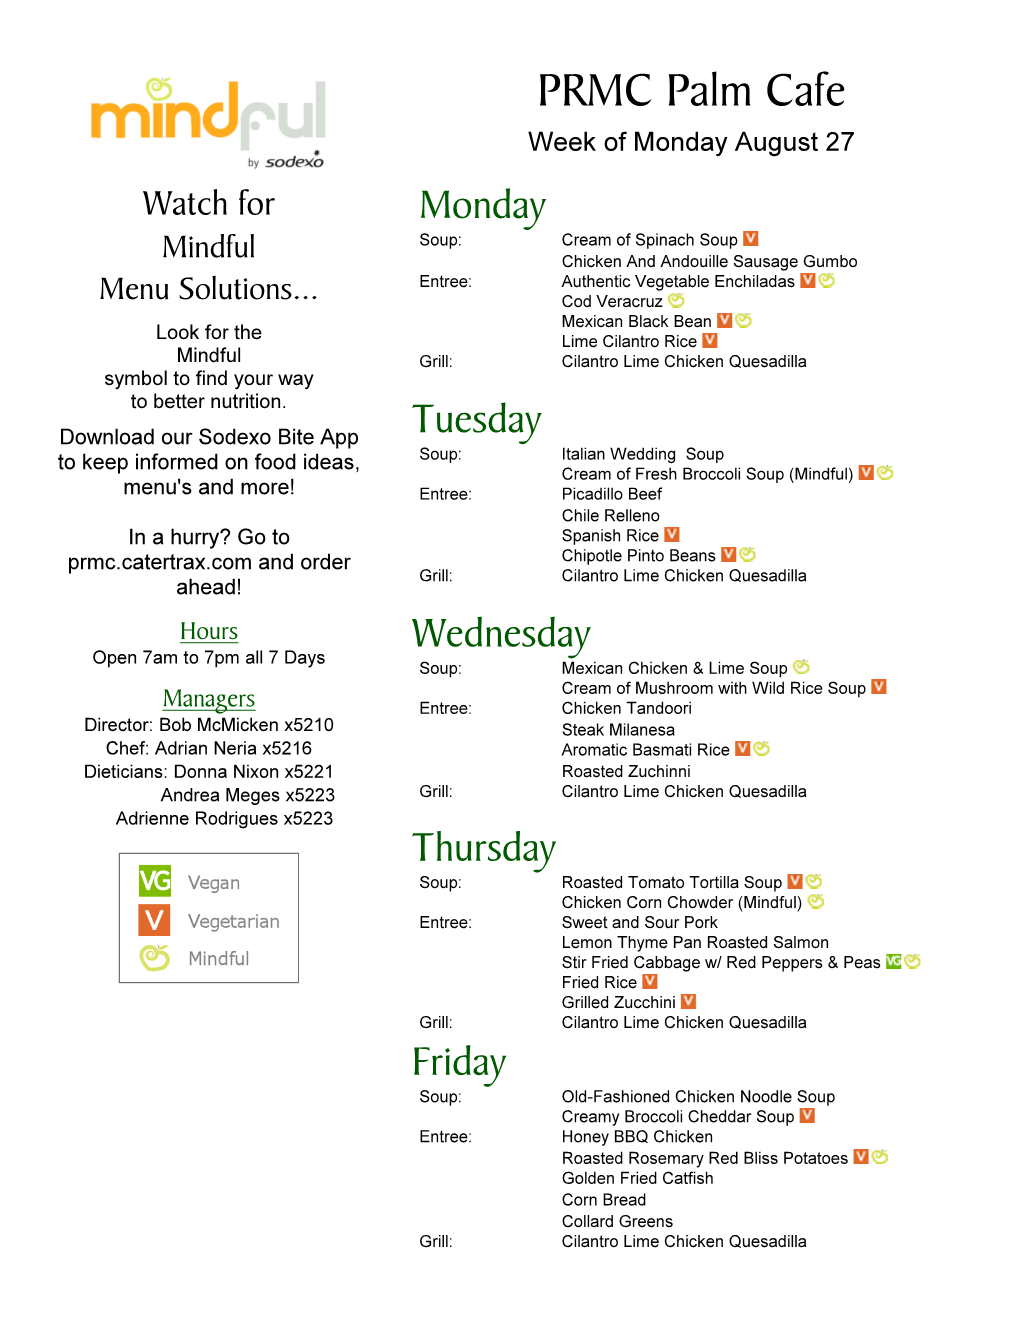 PRMC Palm Cafe Week of Monday August 27 Watch for Monday Mindful Soup: Cream of Spinach Soup Chicken and Andouille Sausage Gumbo Menu Solutions